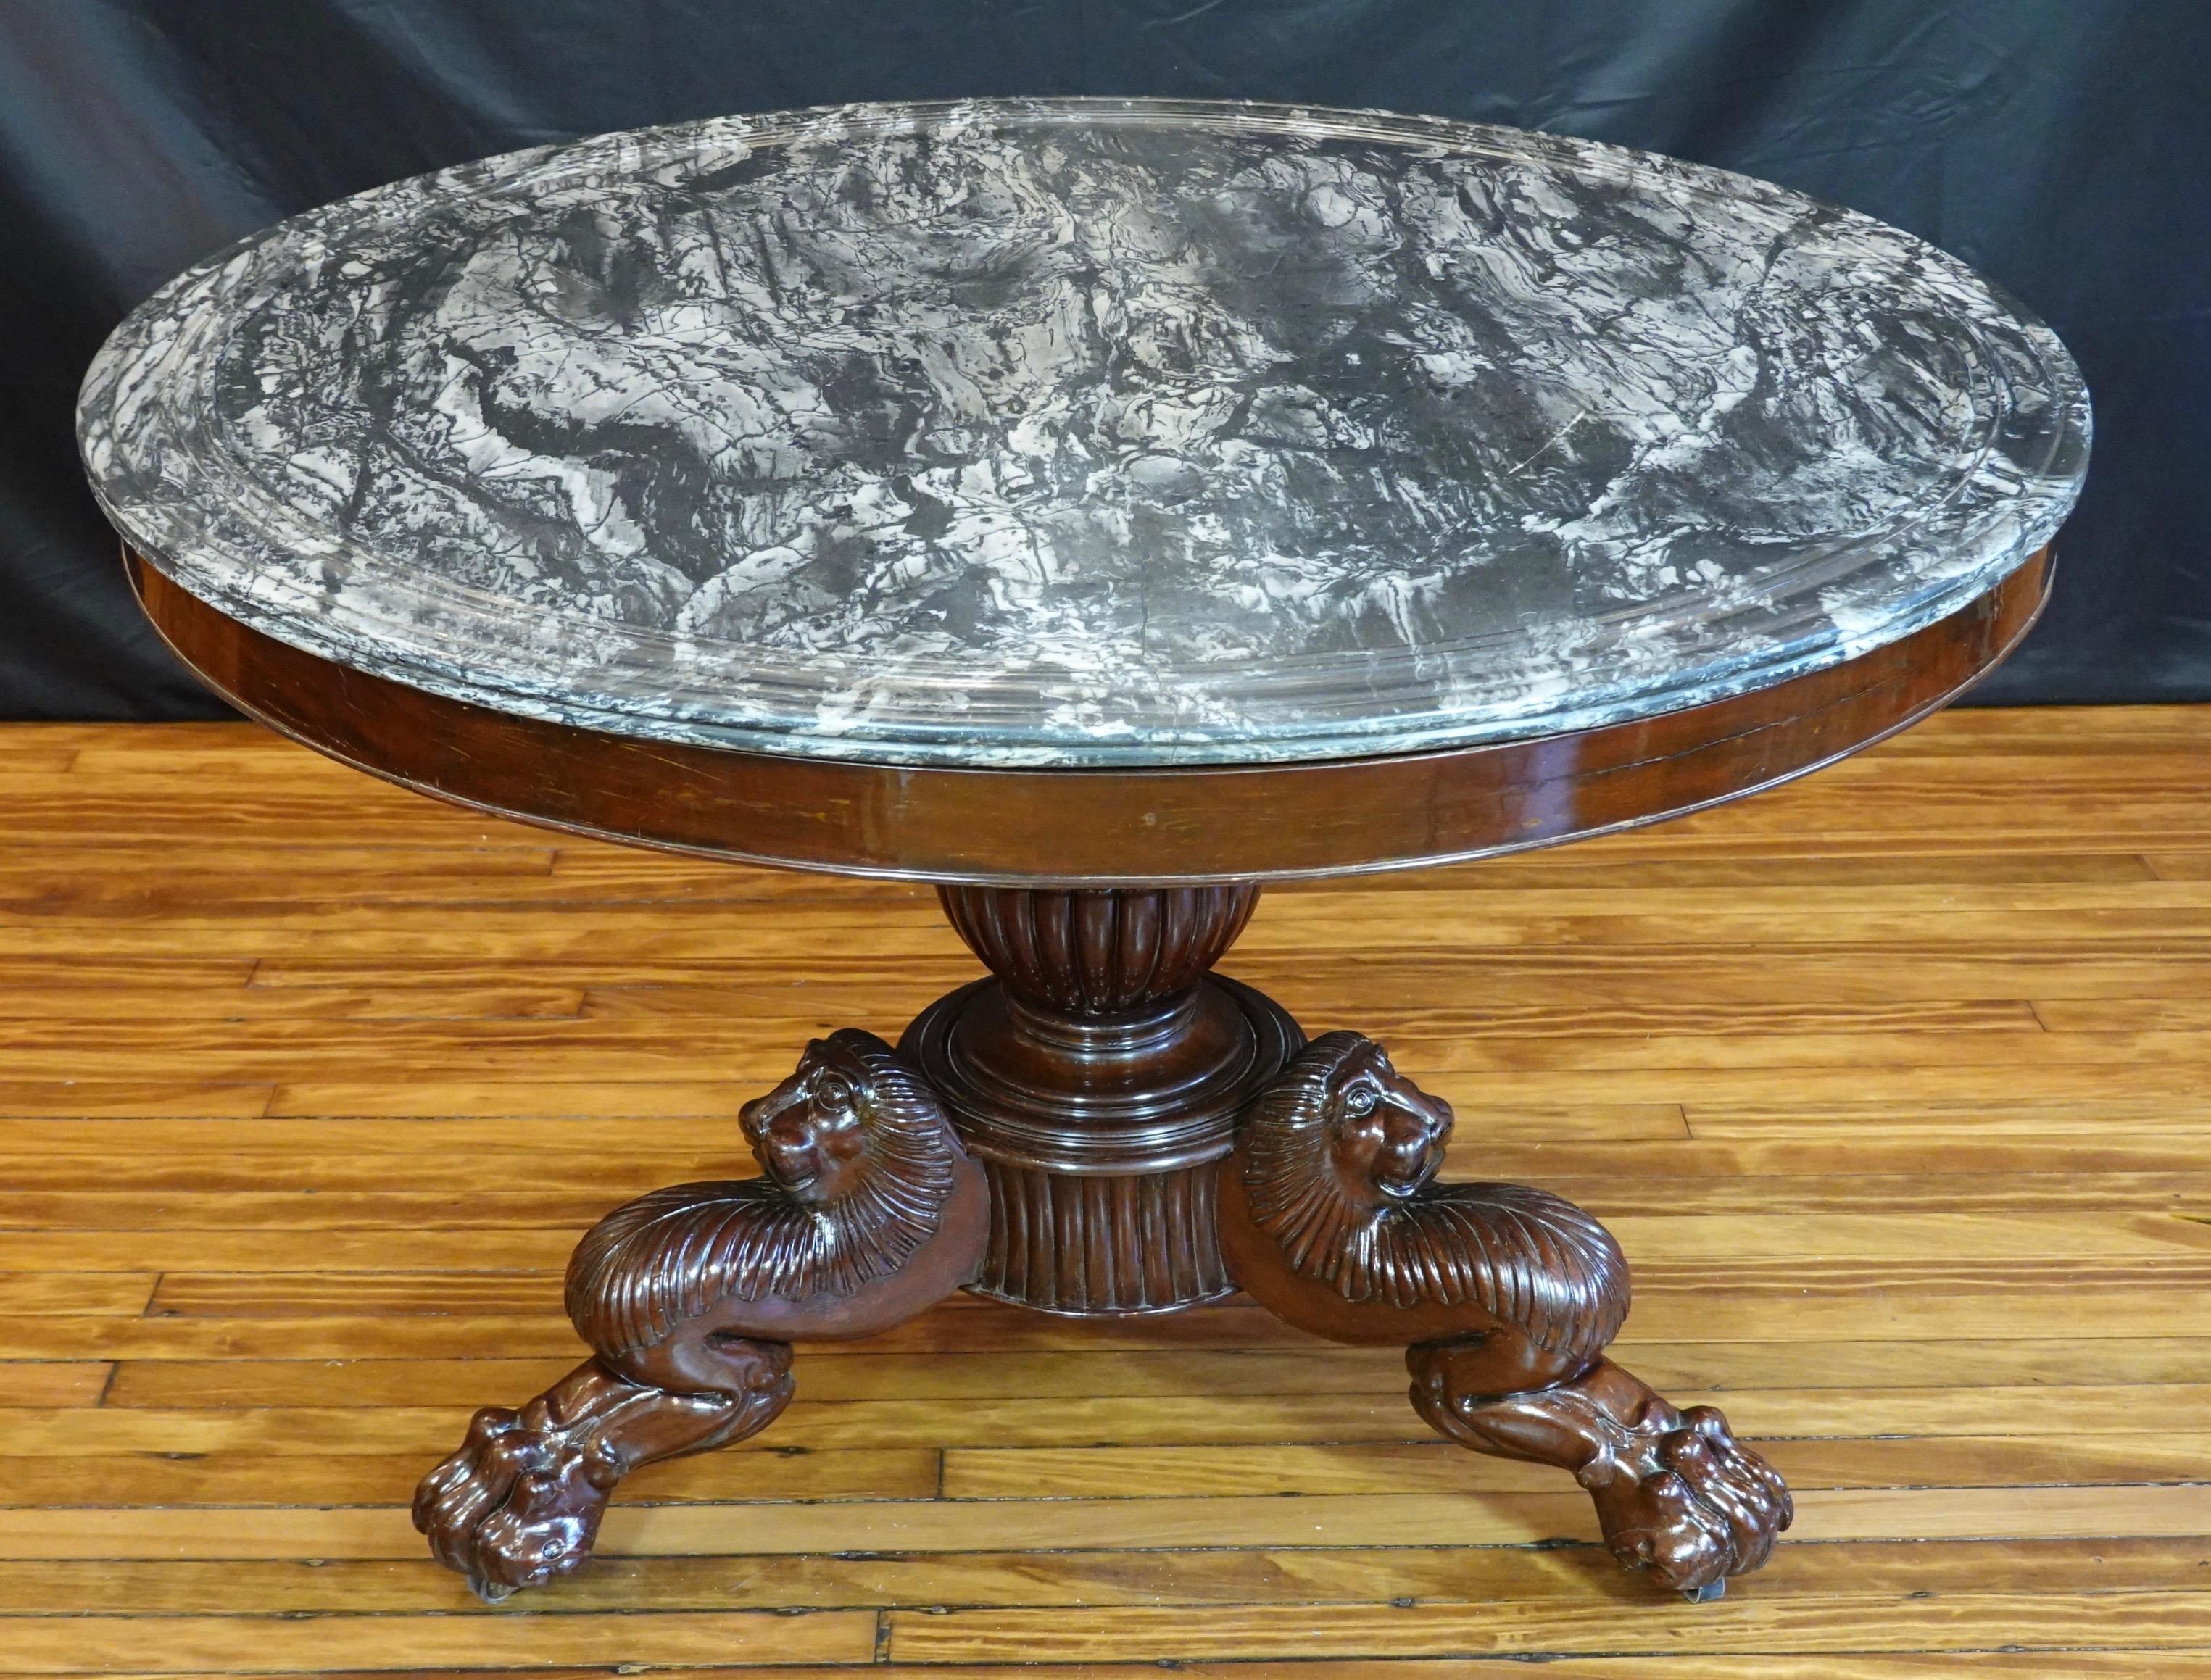 Large French Restoration period (circa 1815-1830) mahogany center table with variegated black and white marble top. The base stands on a central lobed pedestal with three legs with impressive carved lion's heads terminating in paw feet with casters.